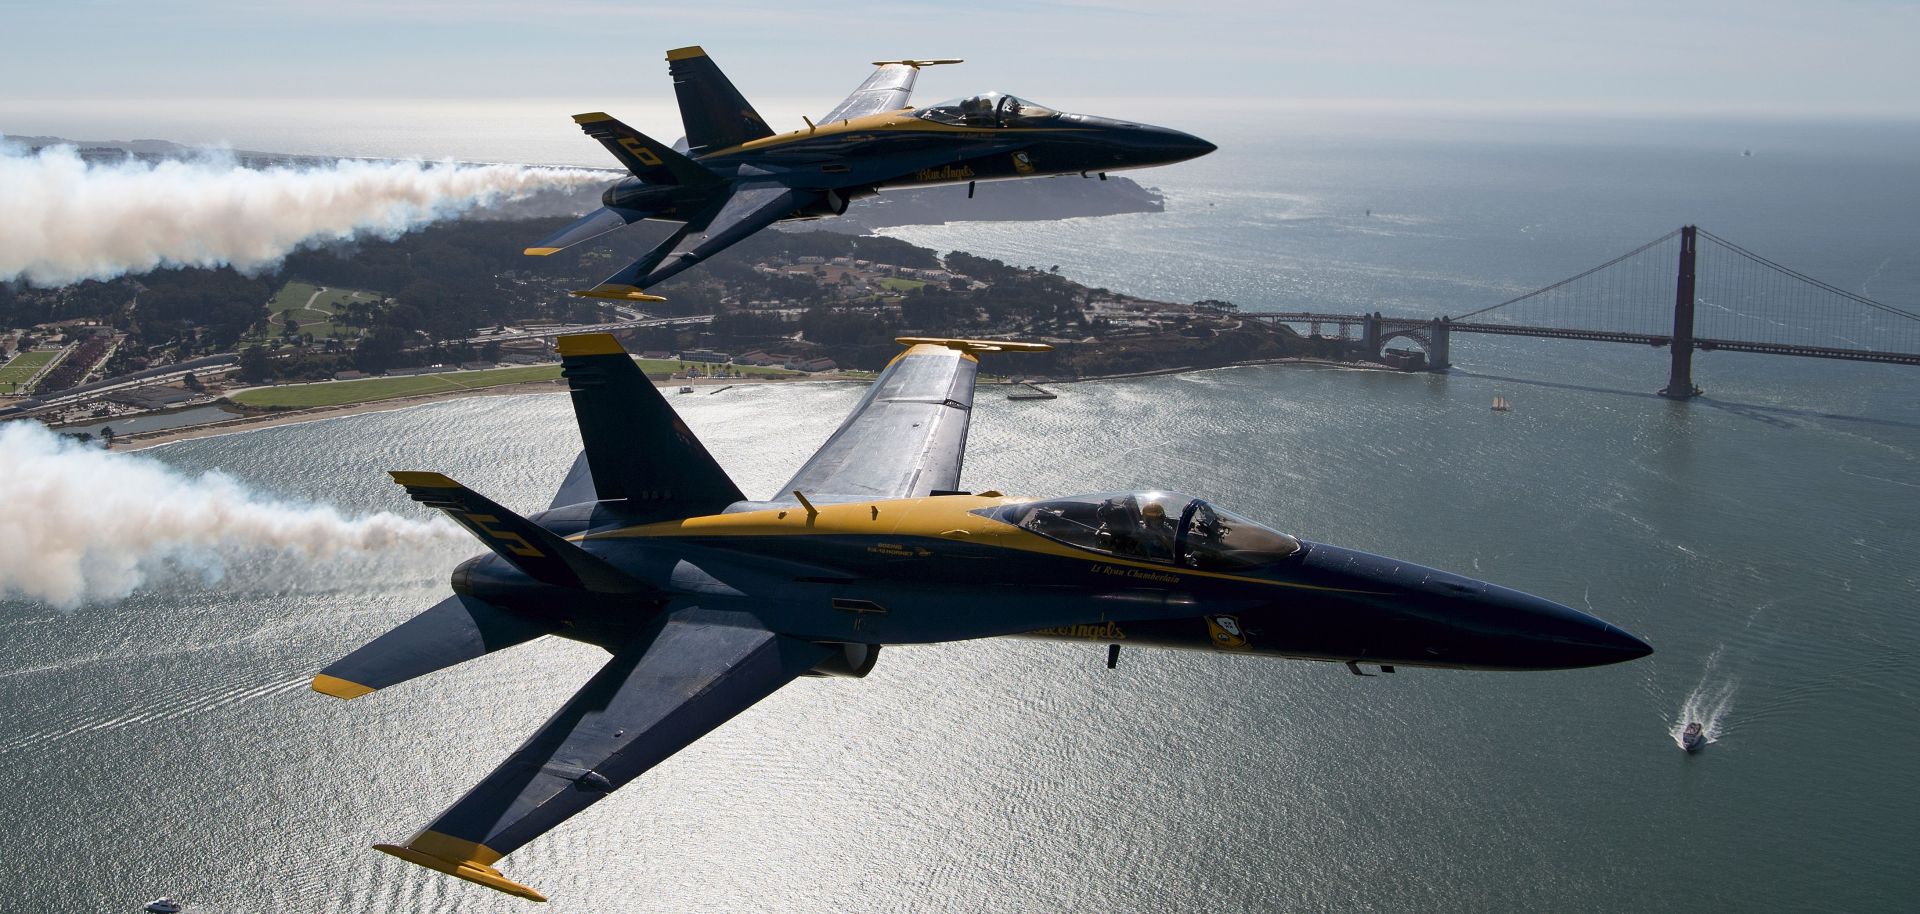 Military aviation demonstration teams like the U.S. Navy's Blue Angels are a staple at air shows around the world, acting as ambassadors for their countries while promoting their military branches.